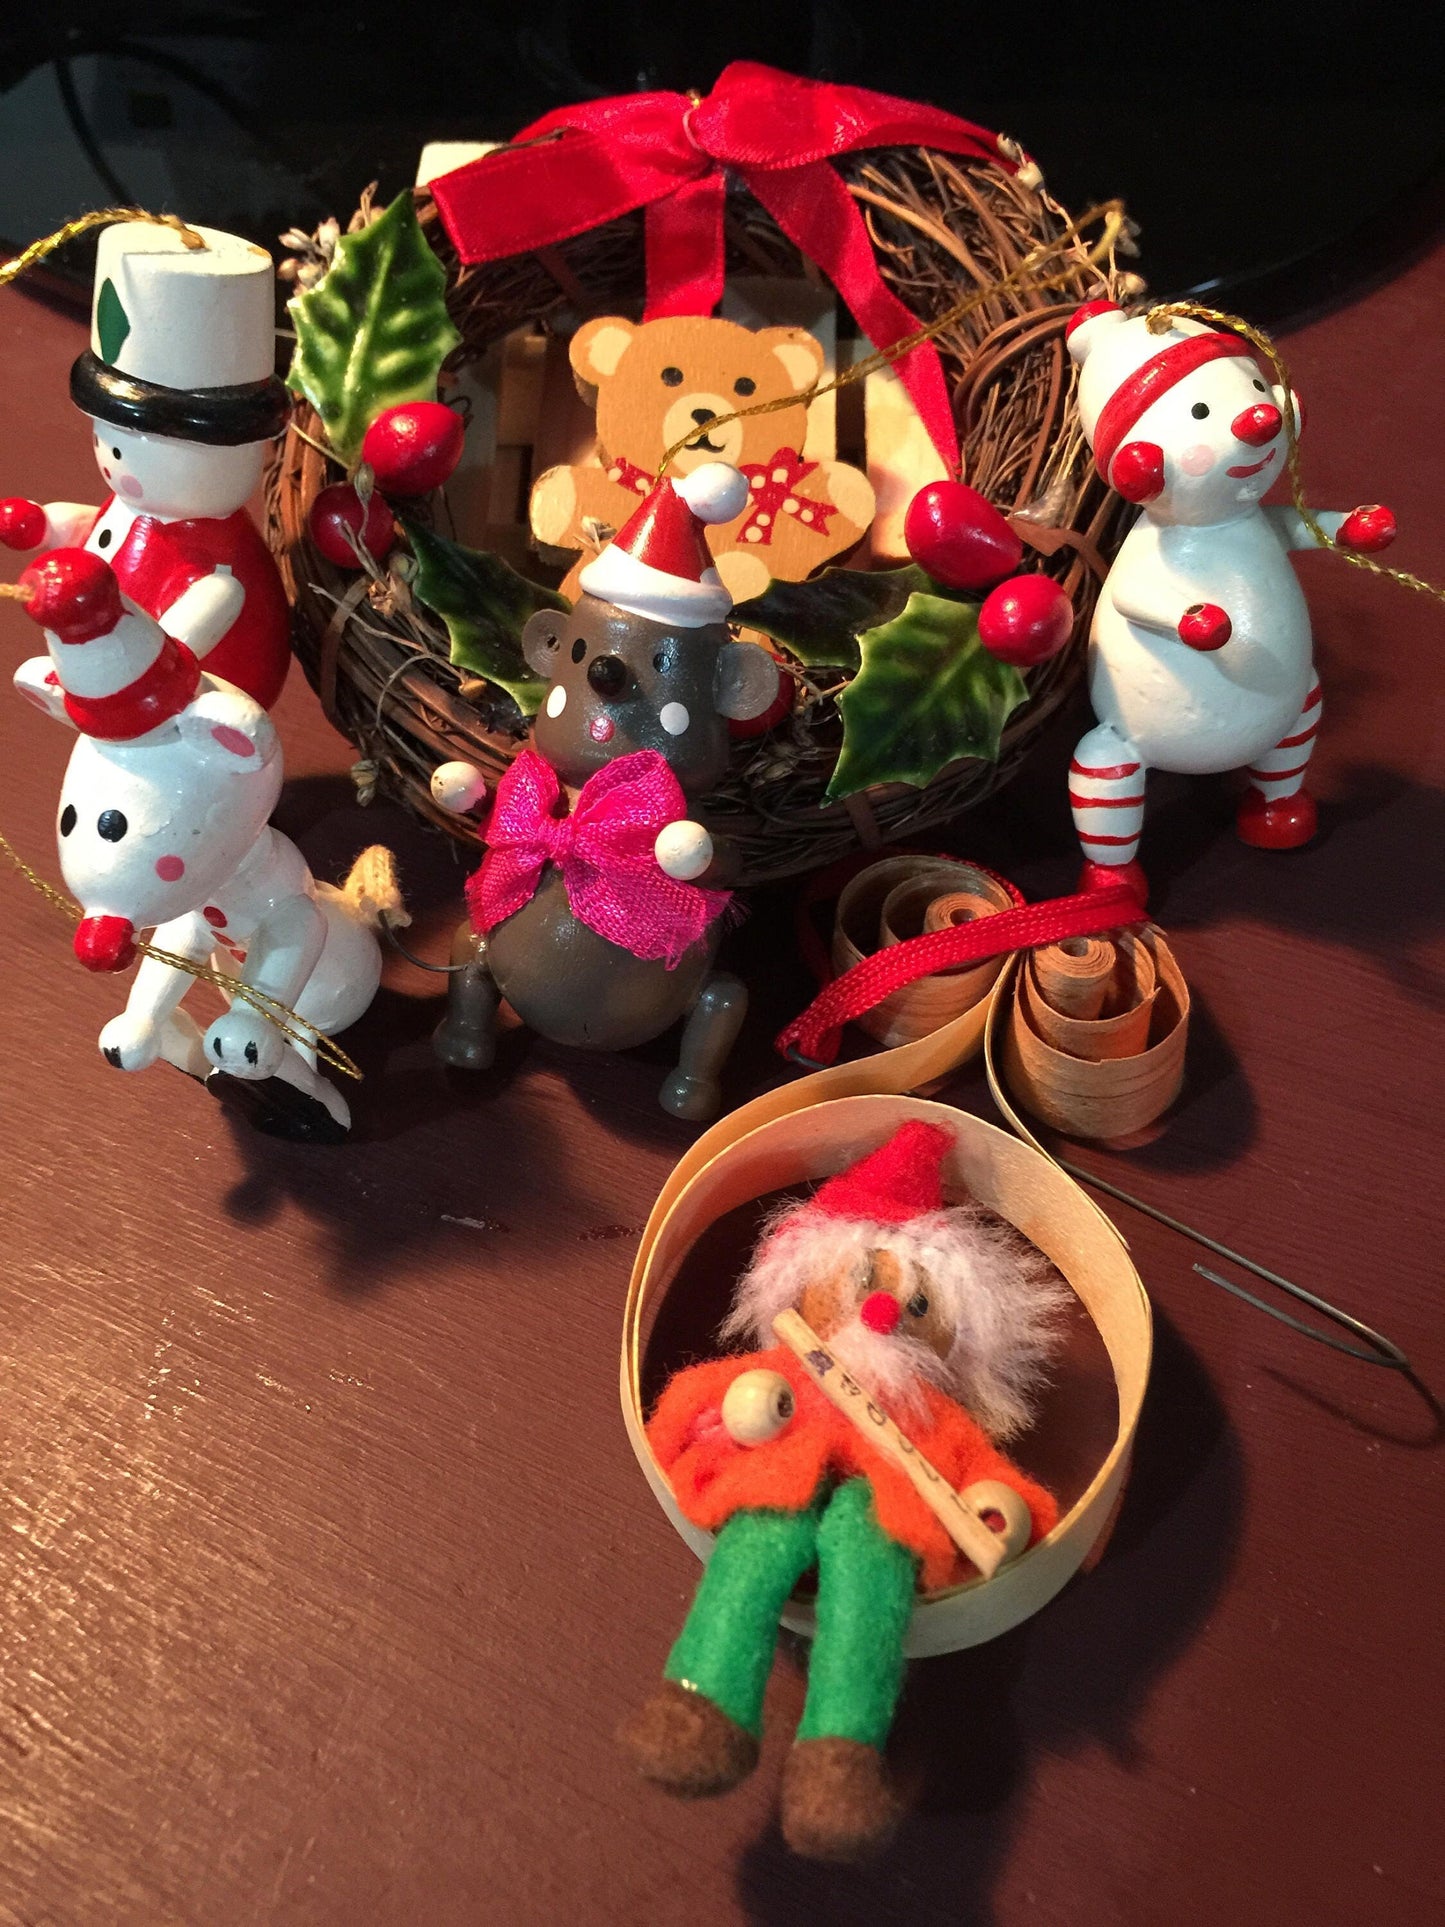 Wooden Christmas Ornaments Vintage set of 6 ornaments with Christmas wreath, mice soldier etc.